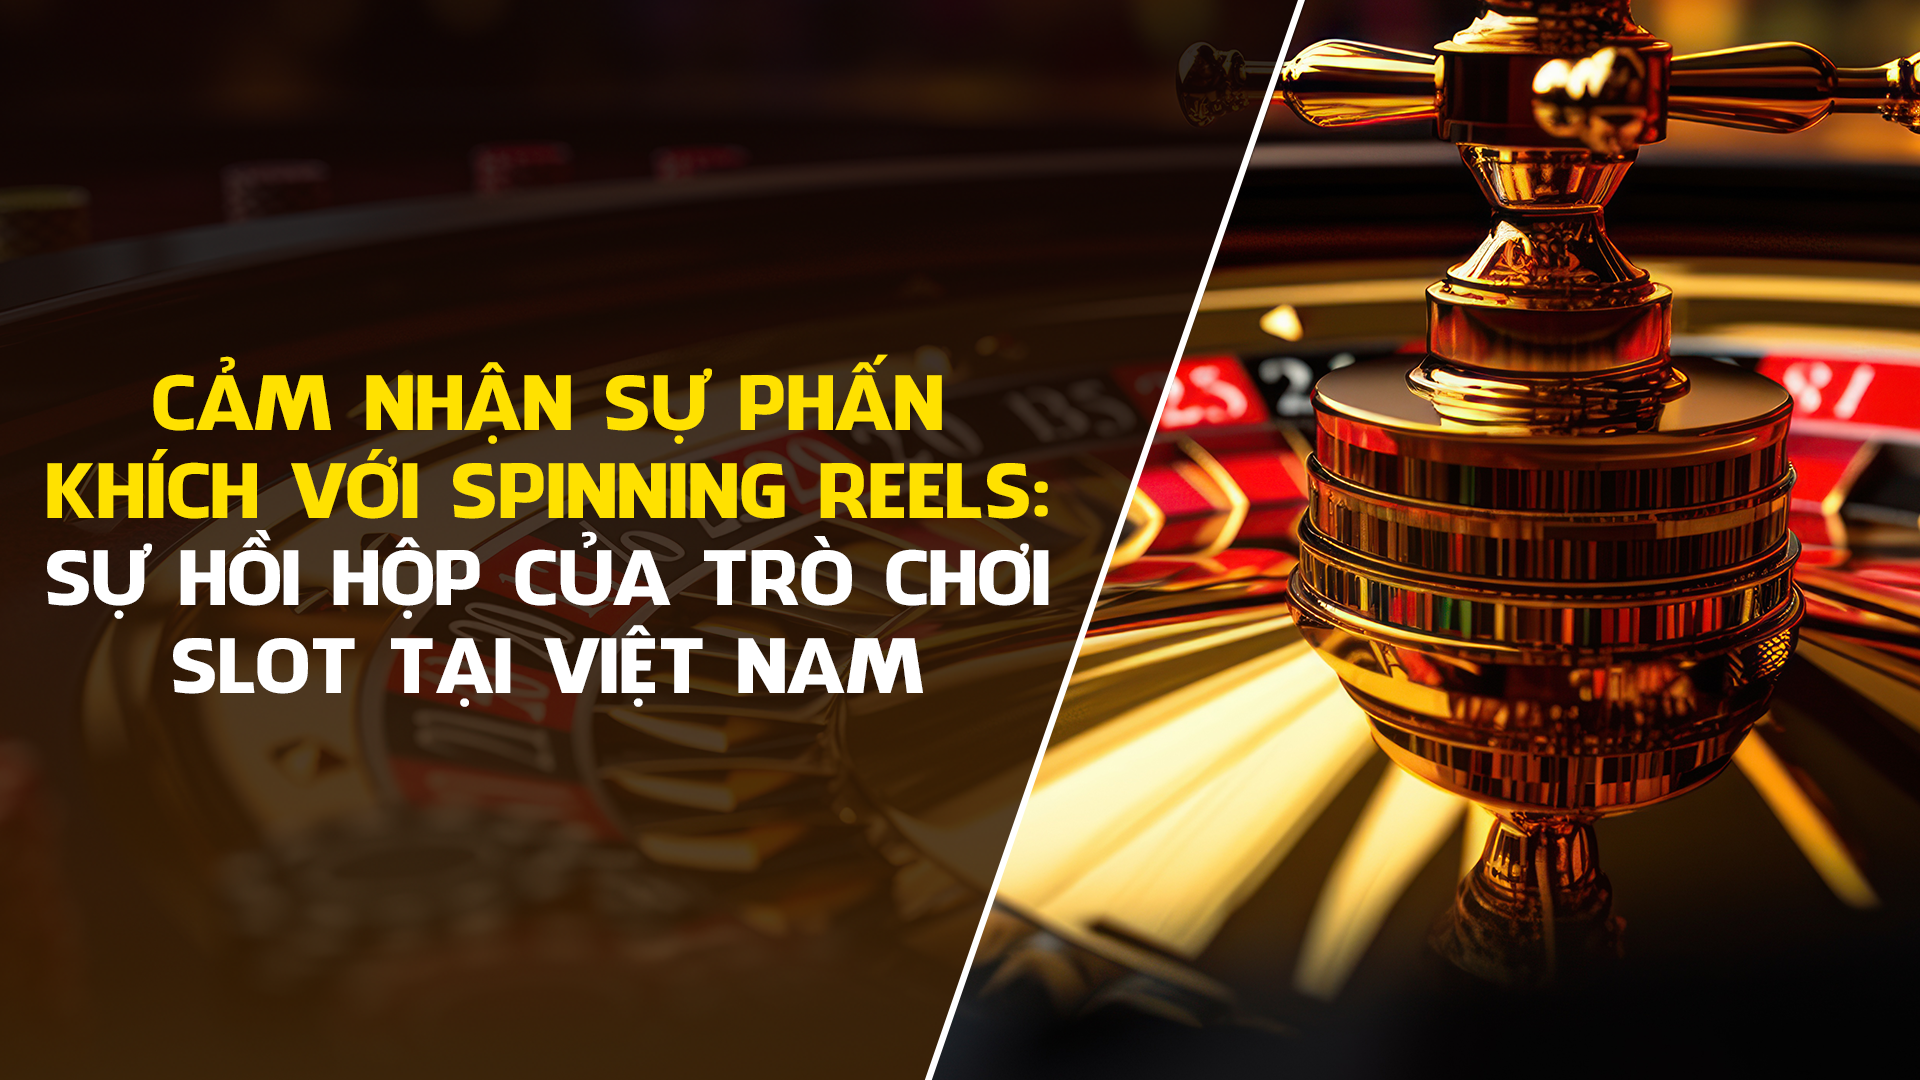 Feel the Excitement with Spinning Reels: The Thrill of Slot Games in Vietnam